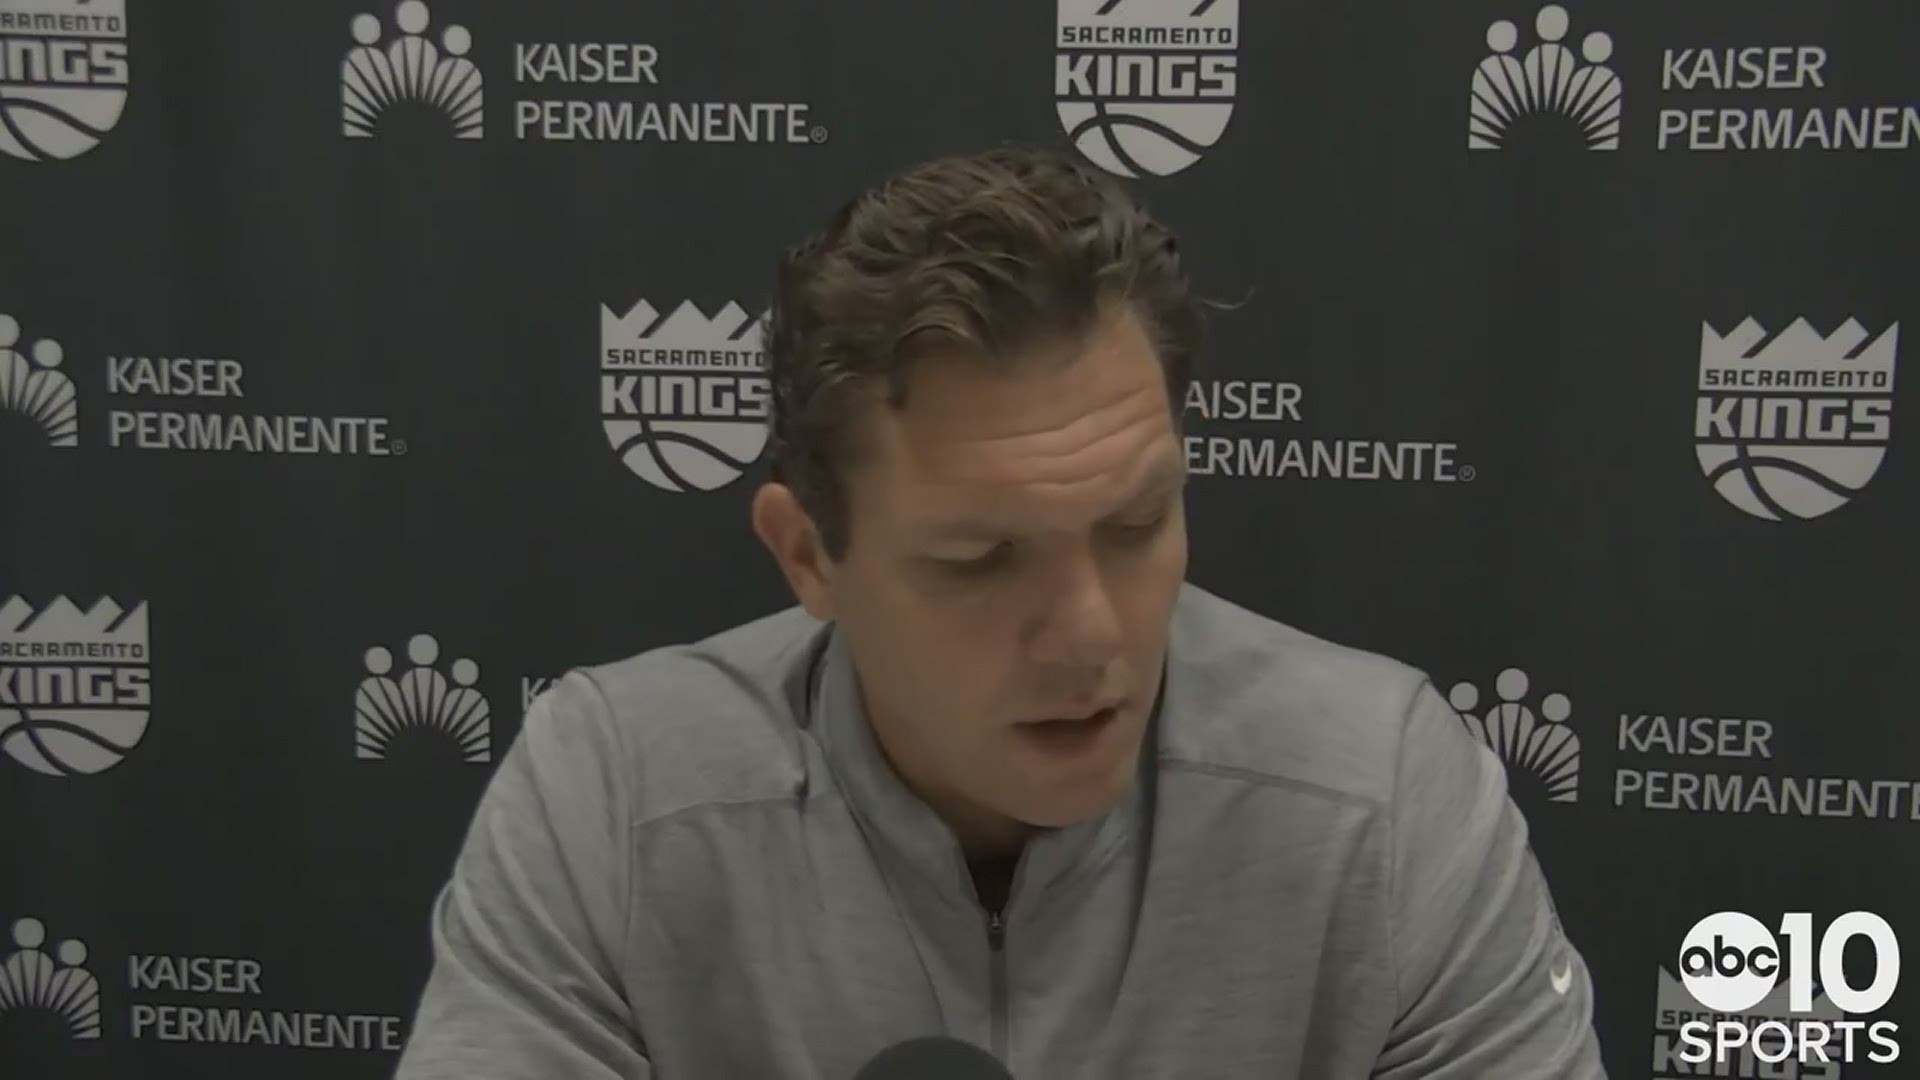 Sacramento Kings head coach Luke Walton talks about Thursday’s loss to the Grizzlies in Memphis and being officially eliminated from the NBA postseason.